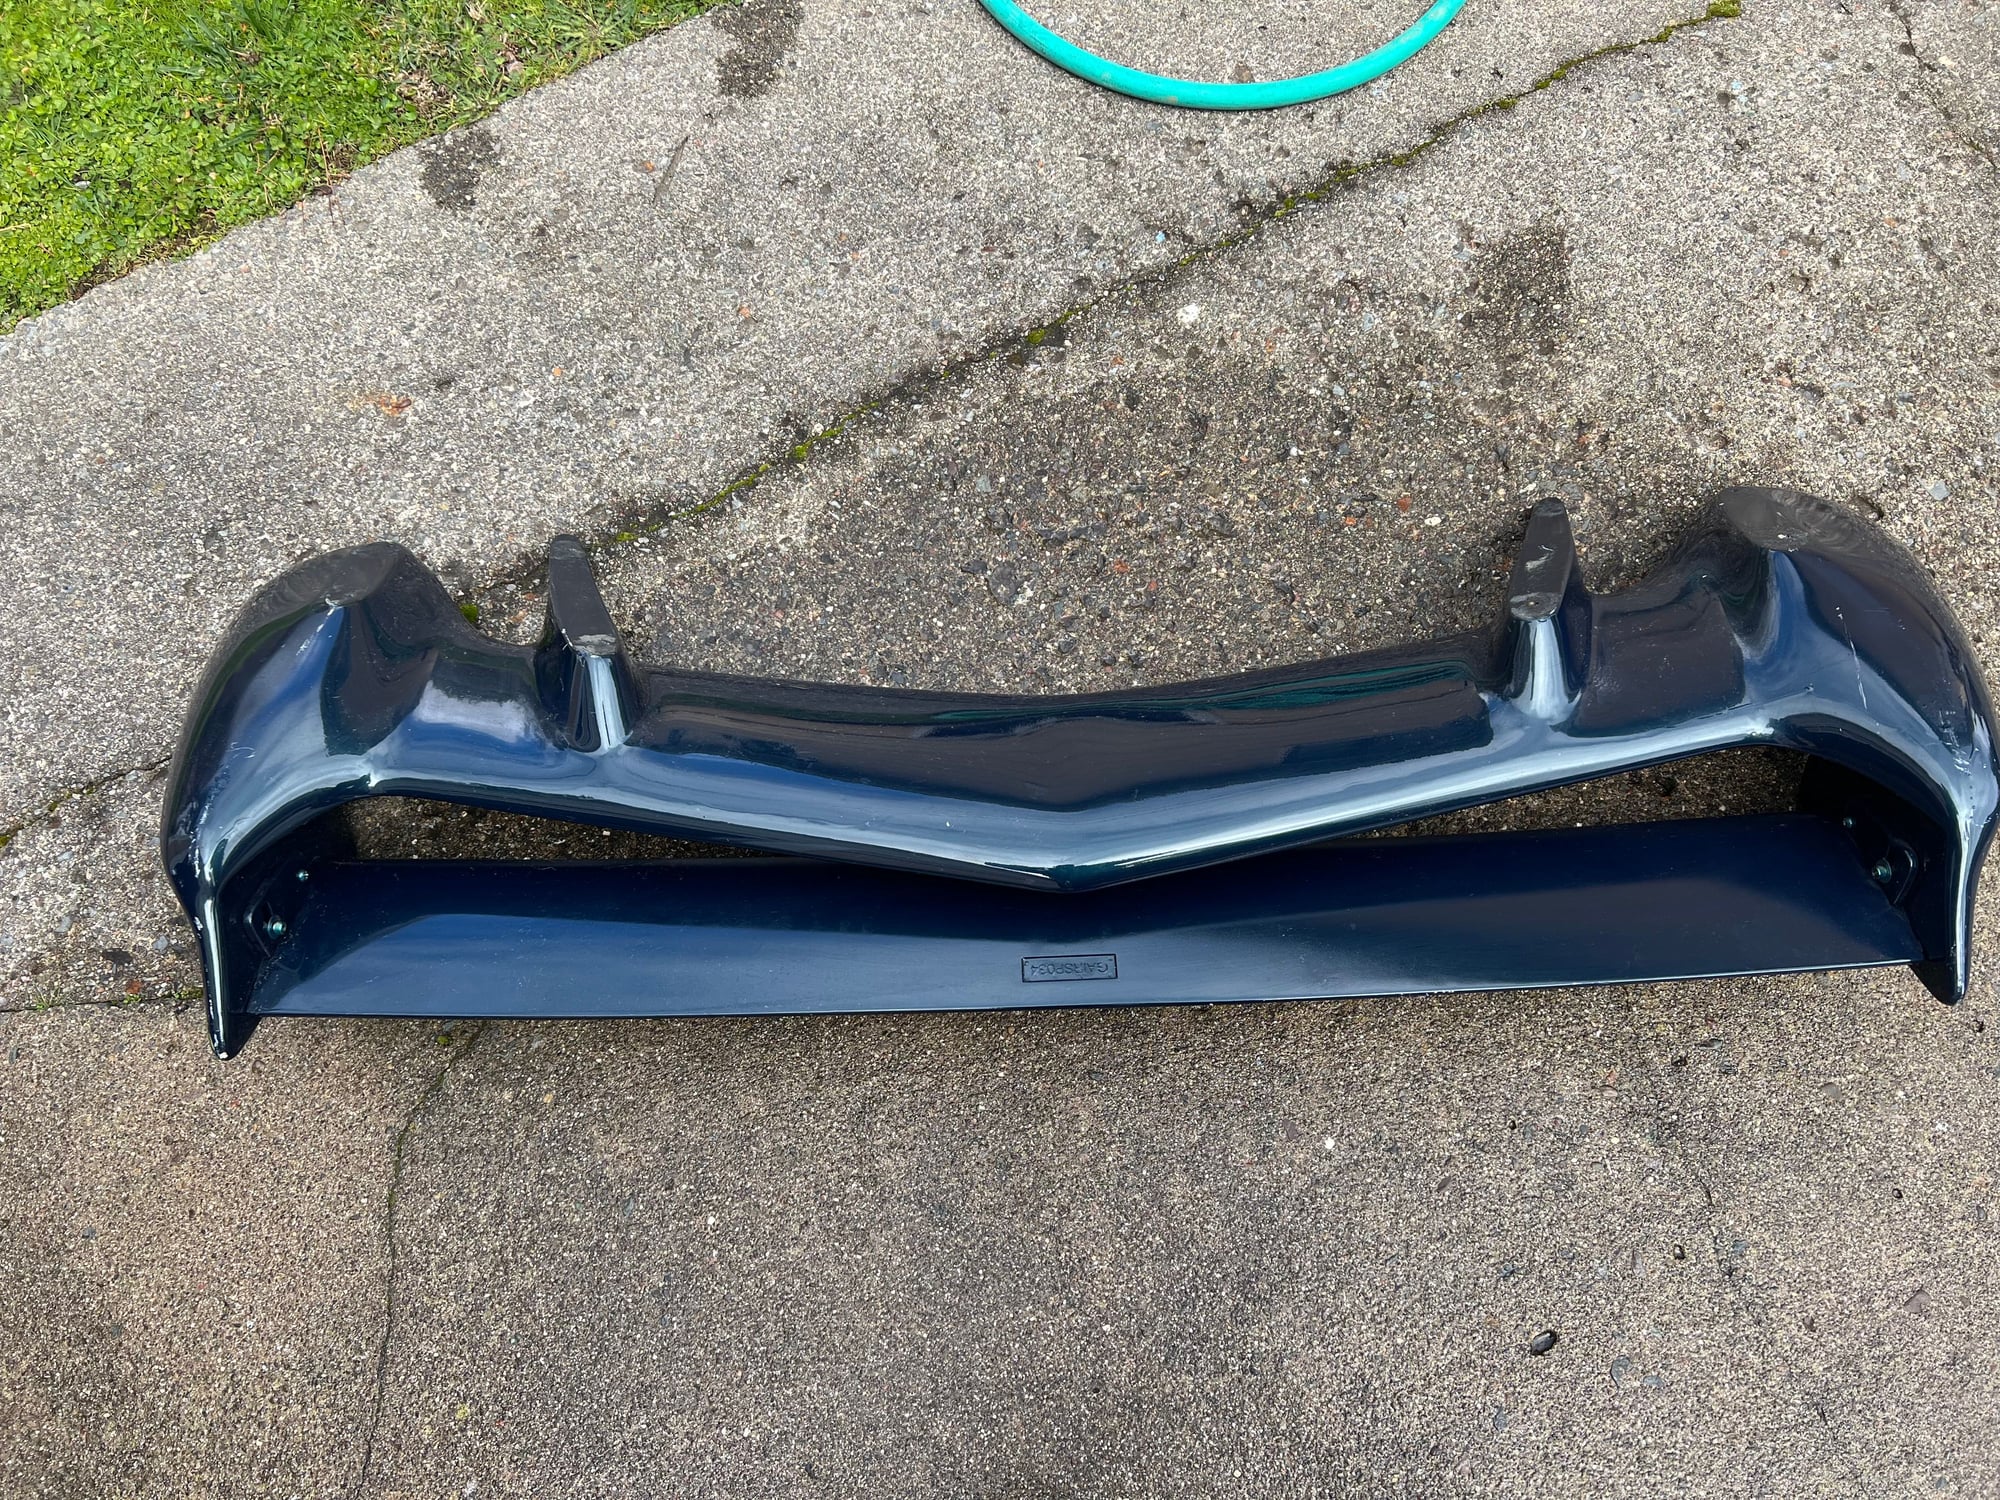 Accessories - Veiiside rear wing C-1 - Used - 1992 to 1999 Mazda RX-7 - Mill Valley, CA 94941, United States